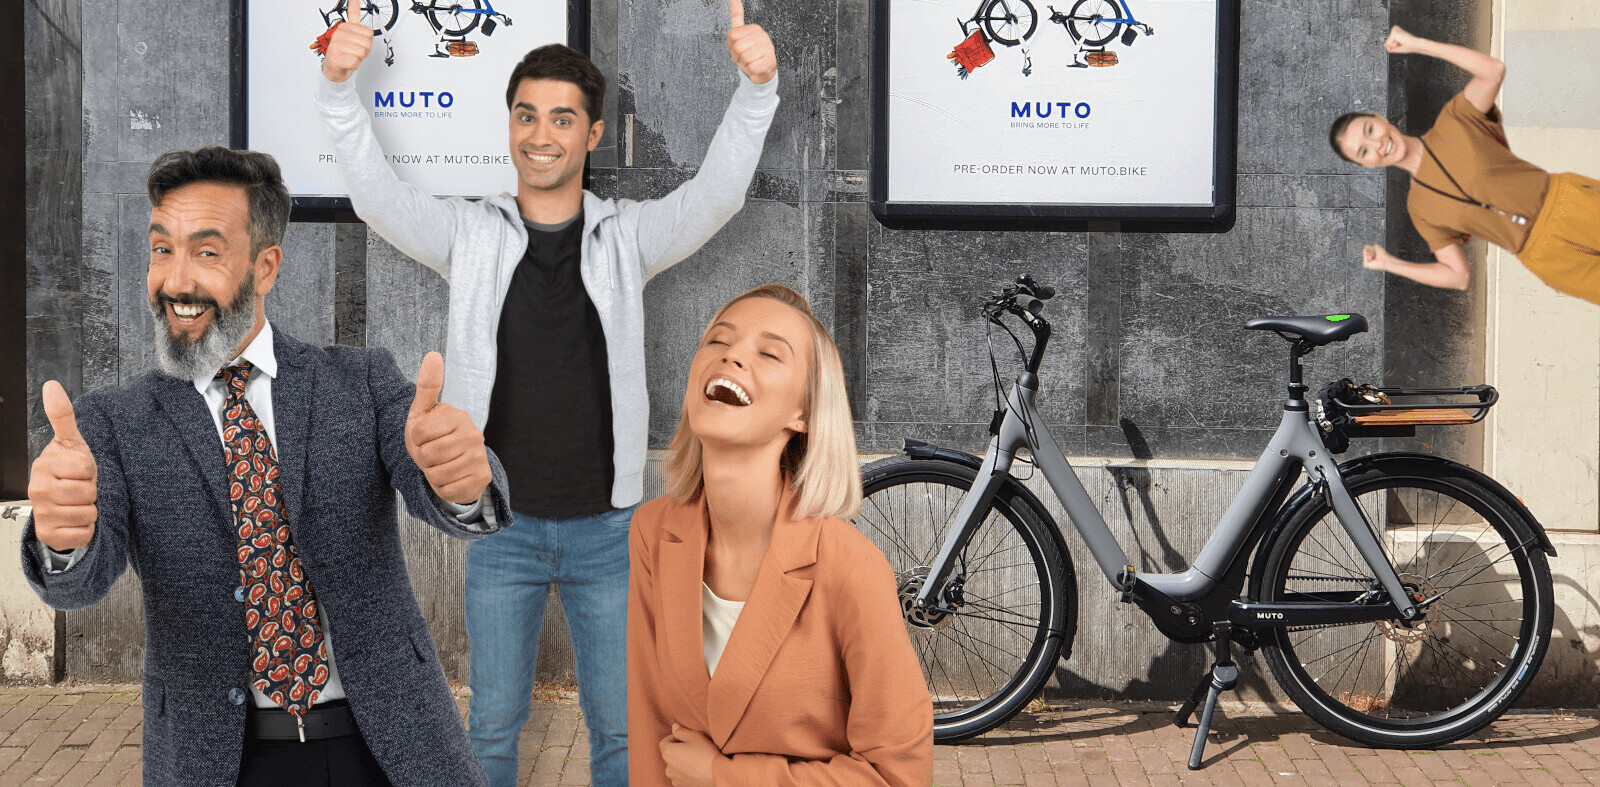 Norwegian ebike owners ride 4x as much after buying their bikes